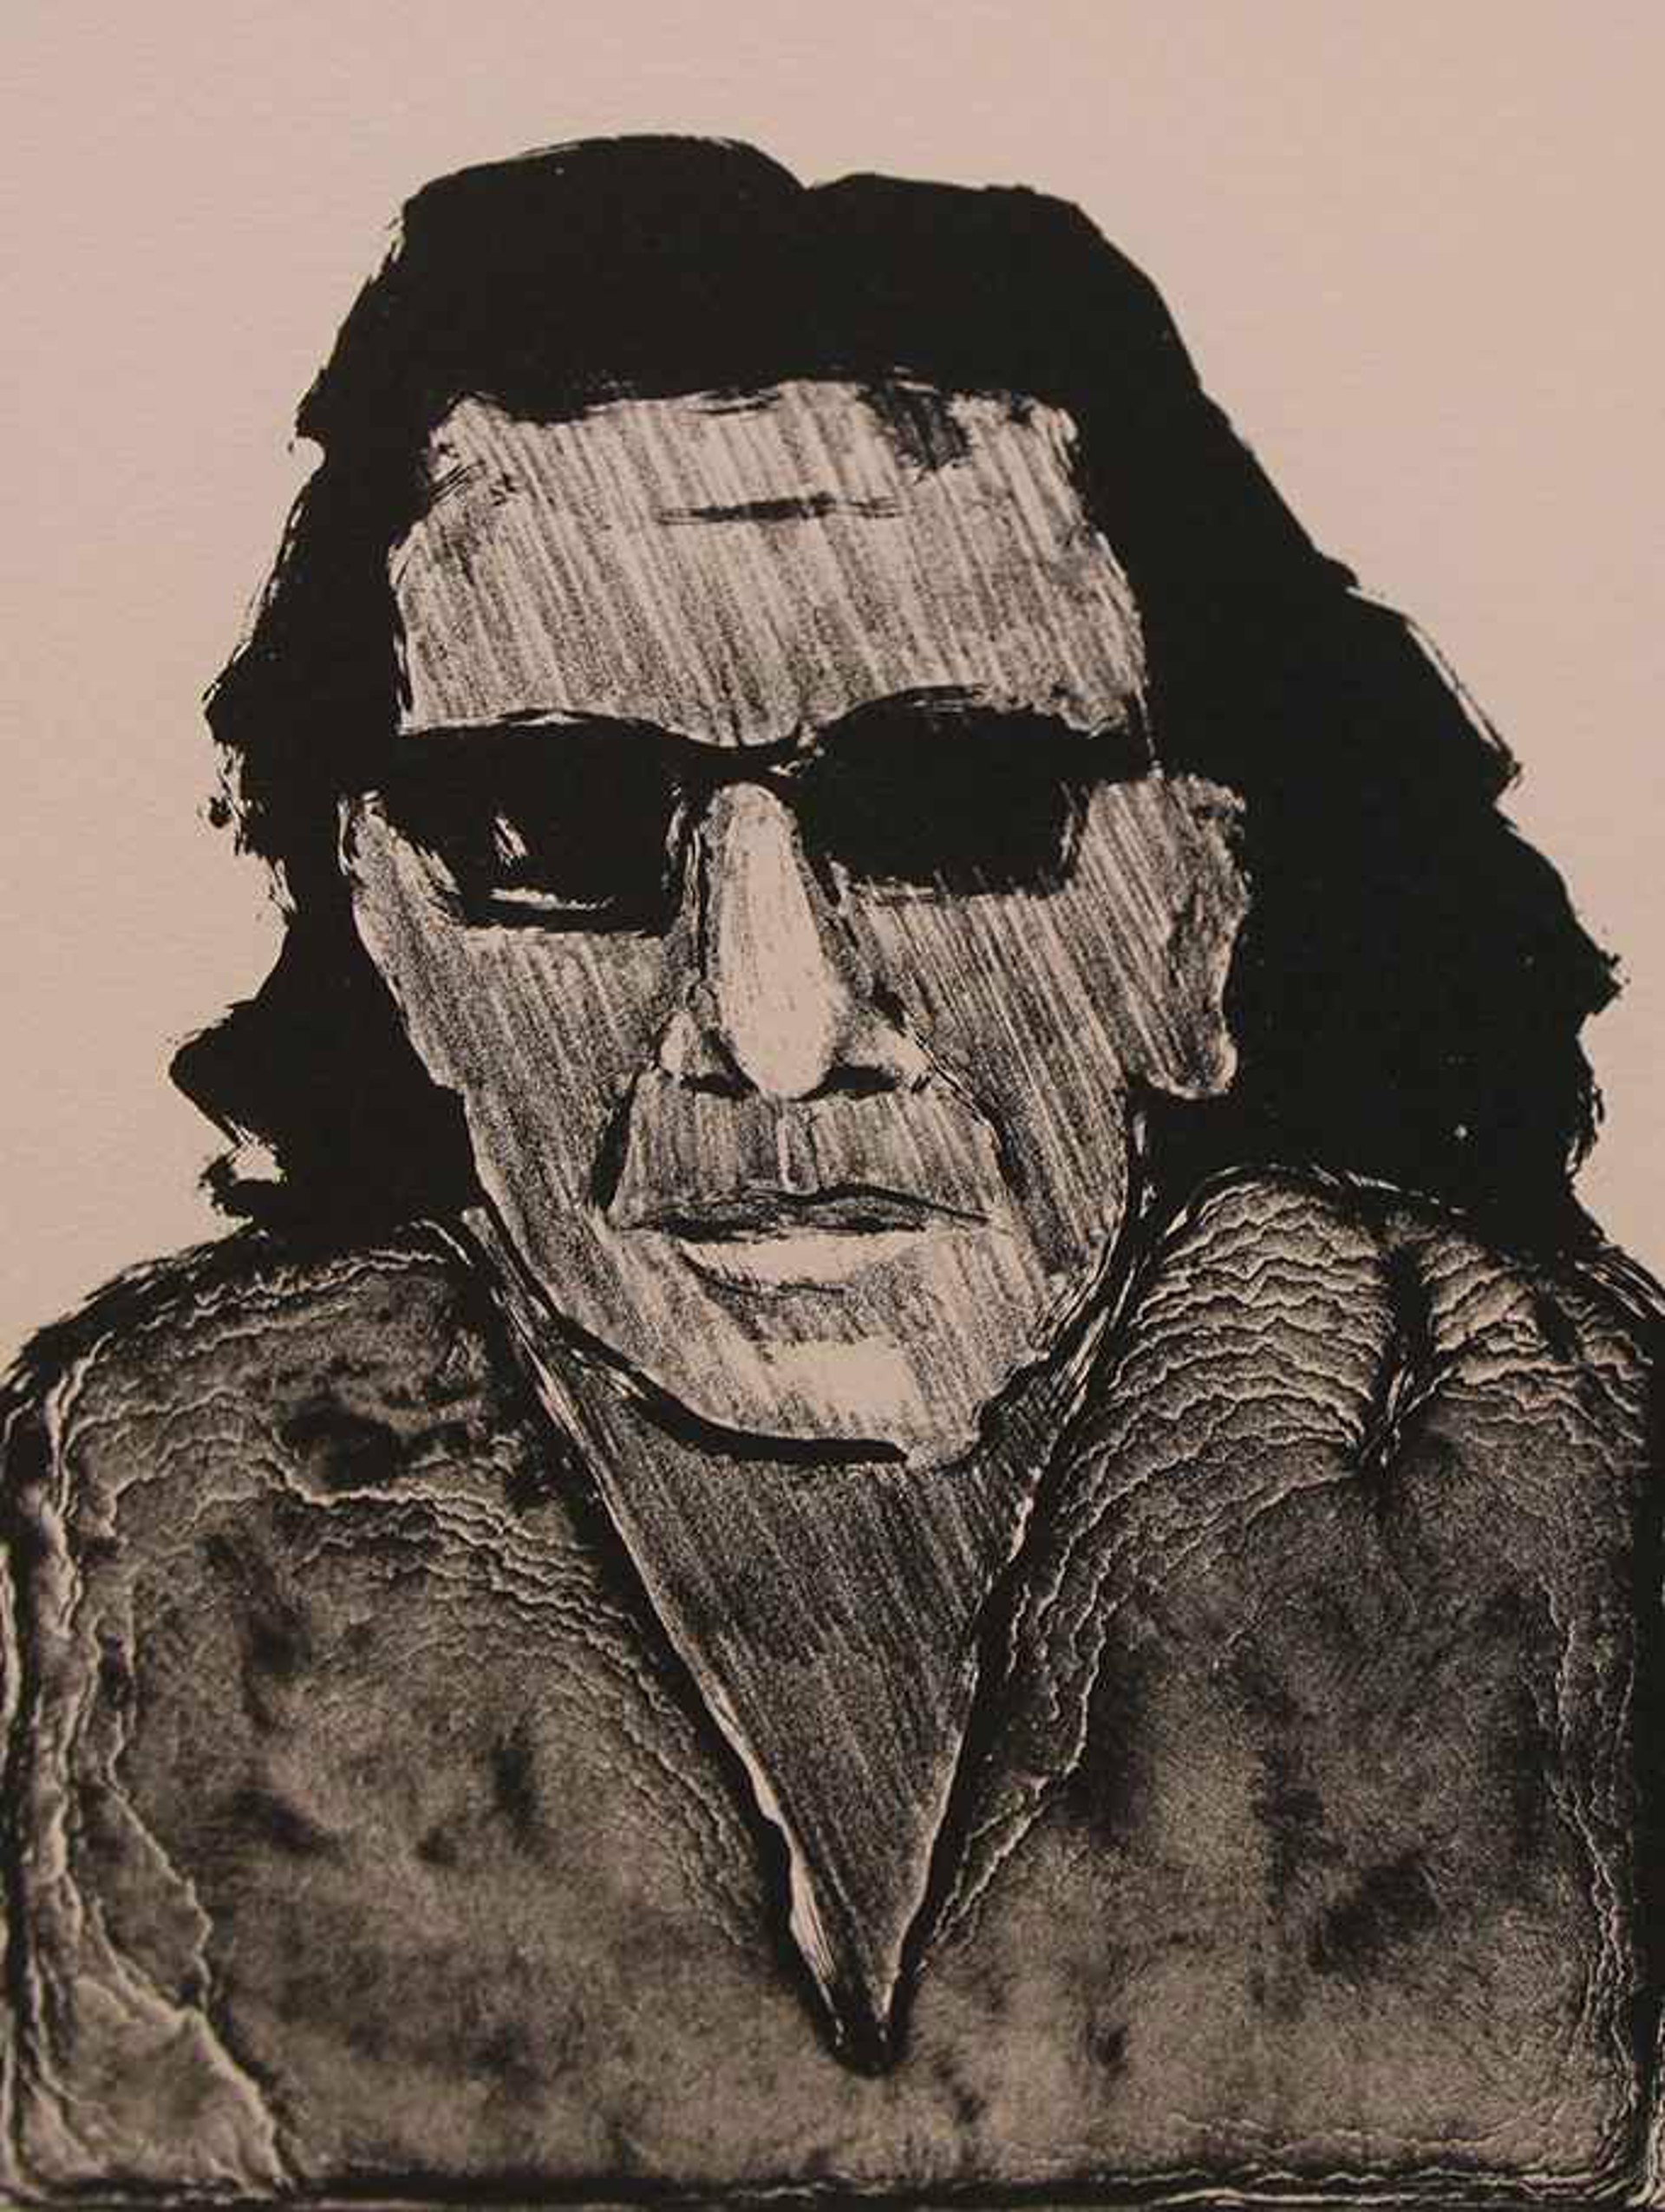 Self-portrait with Dark Glasses (Second State), Ed. 8 of 20 by Fritz Scholder